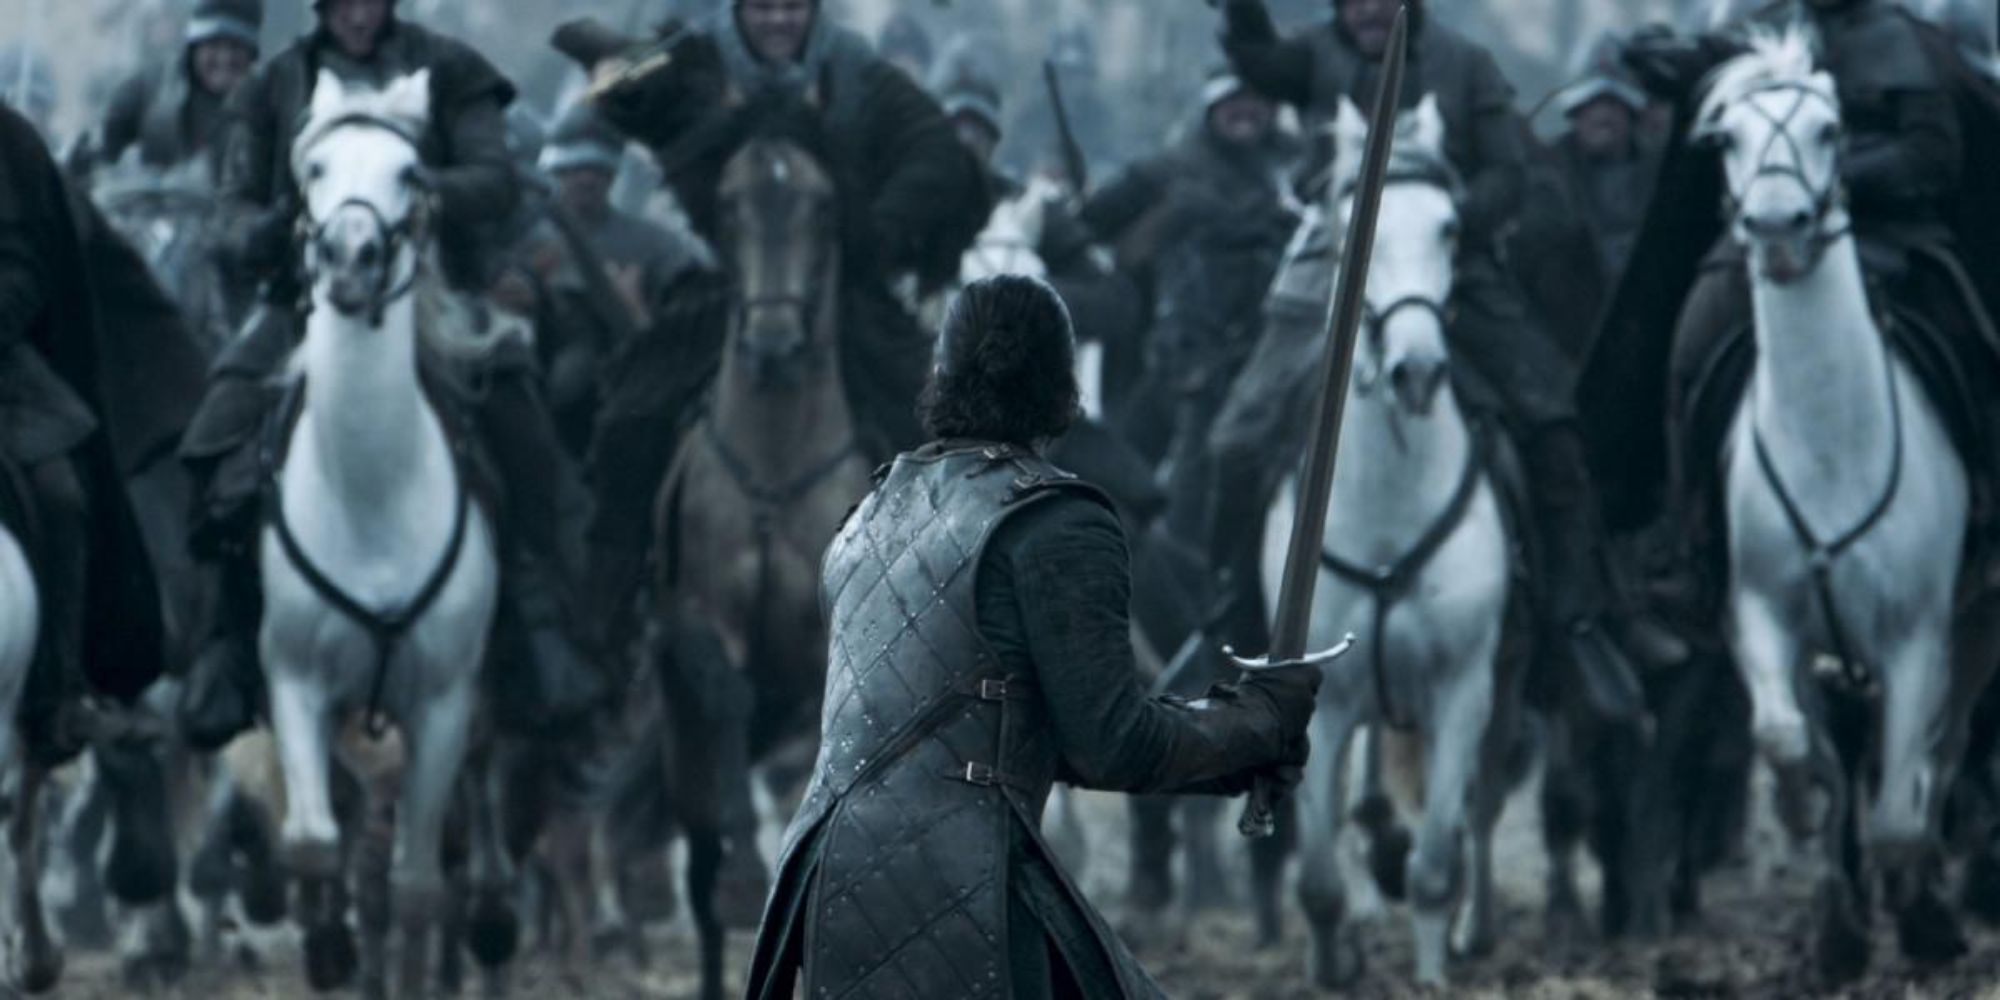 Jon Snow facing an army in Game of Thrones.